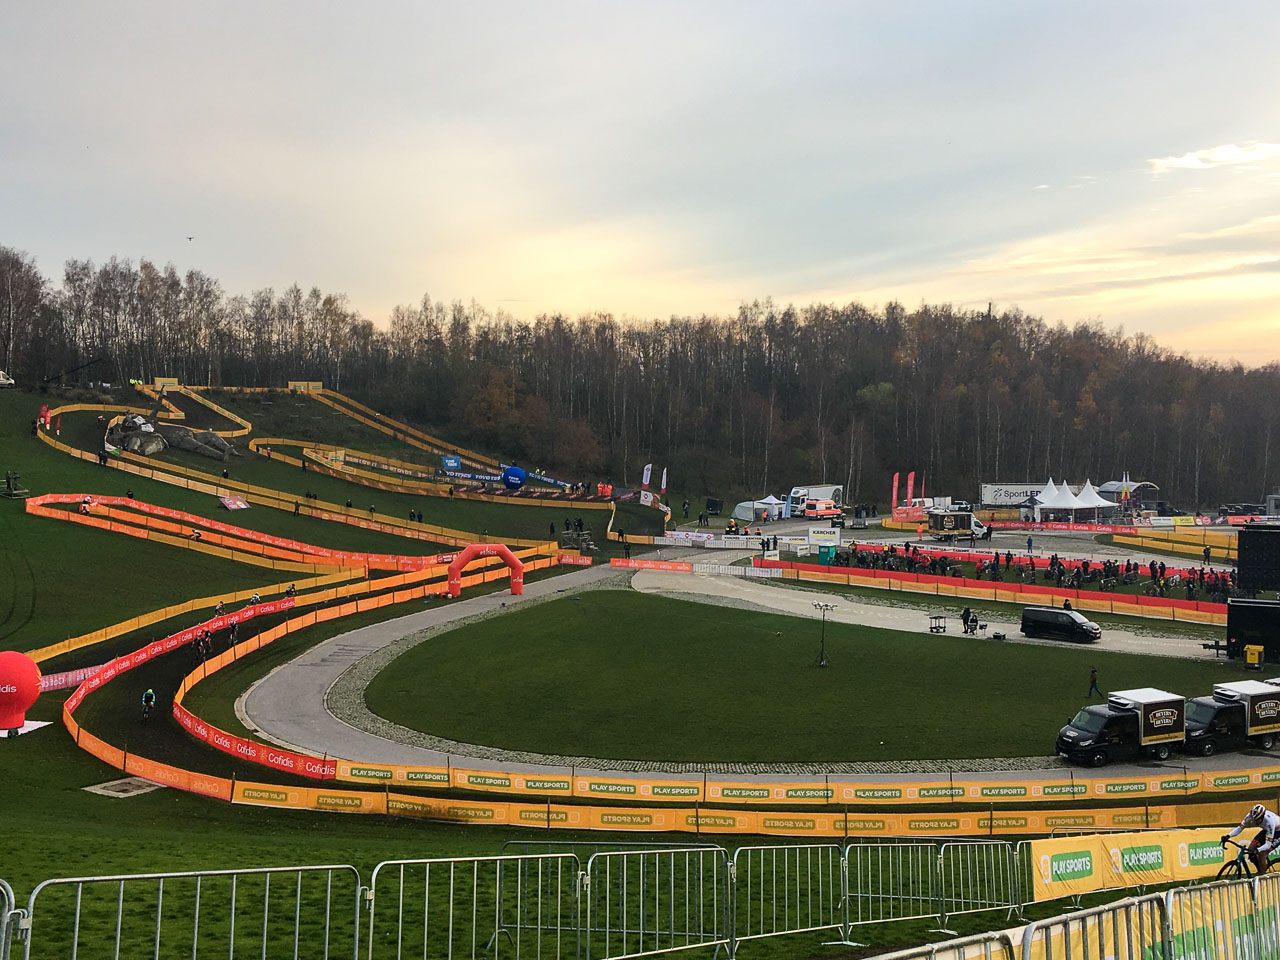 The best view at the 2020 Superprestige Boom venue. photo: courtesy